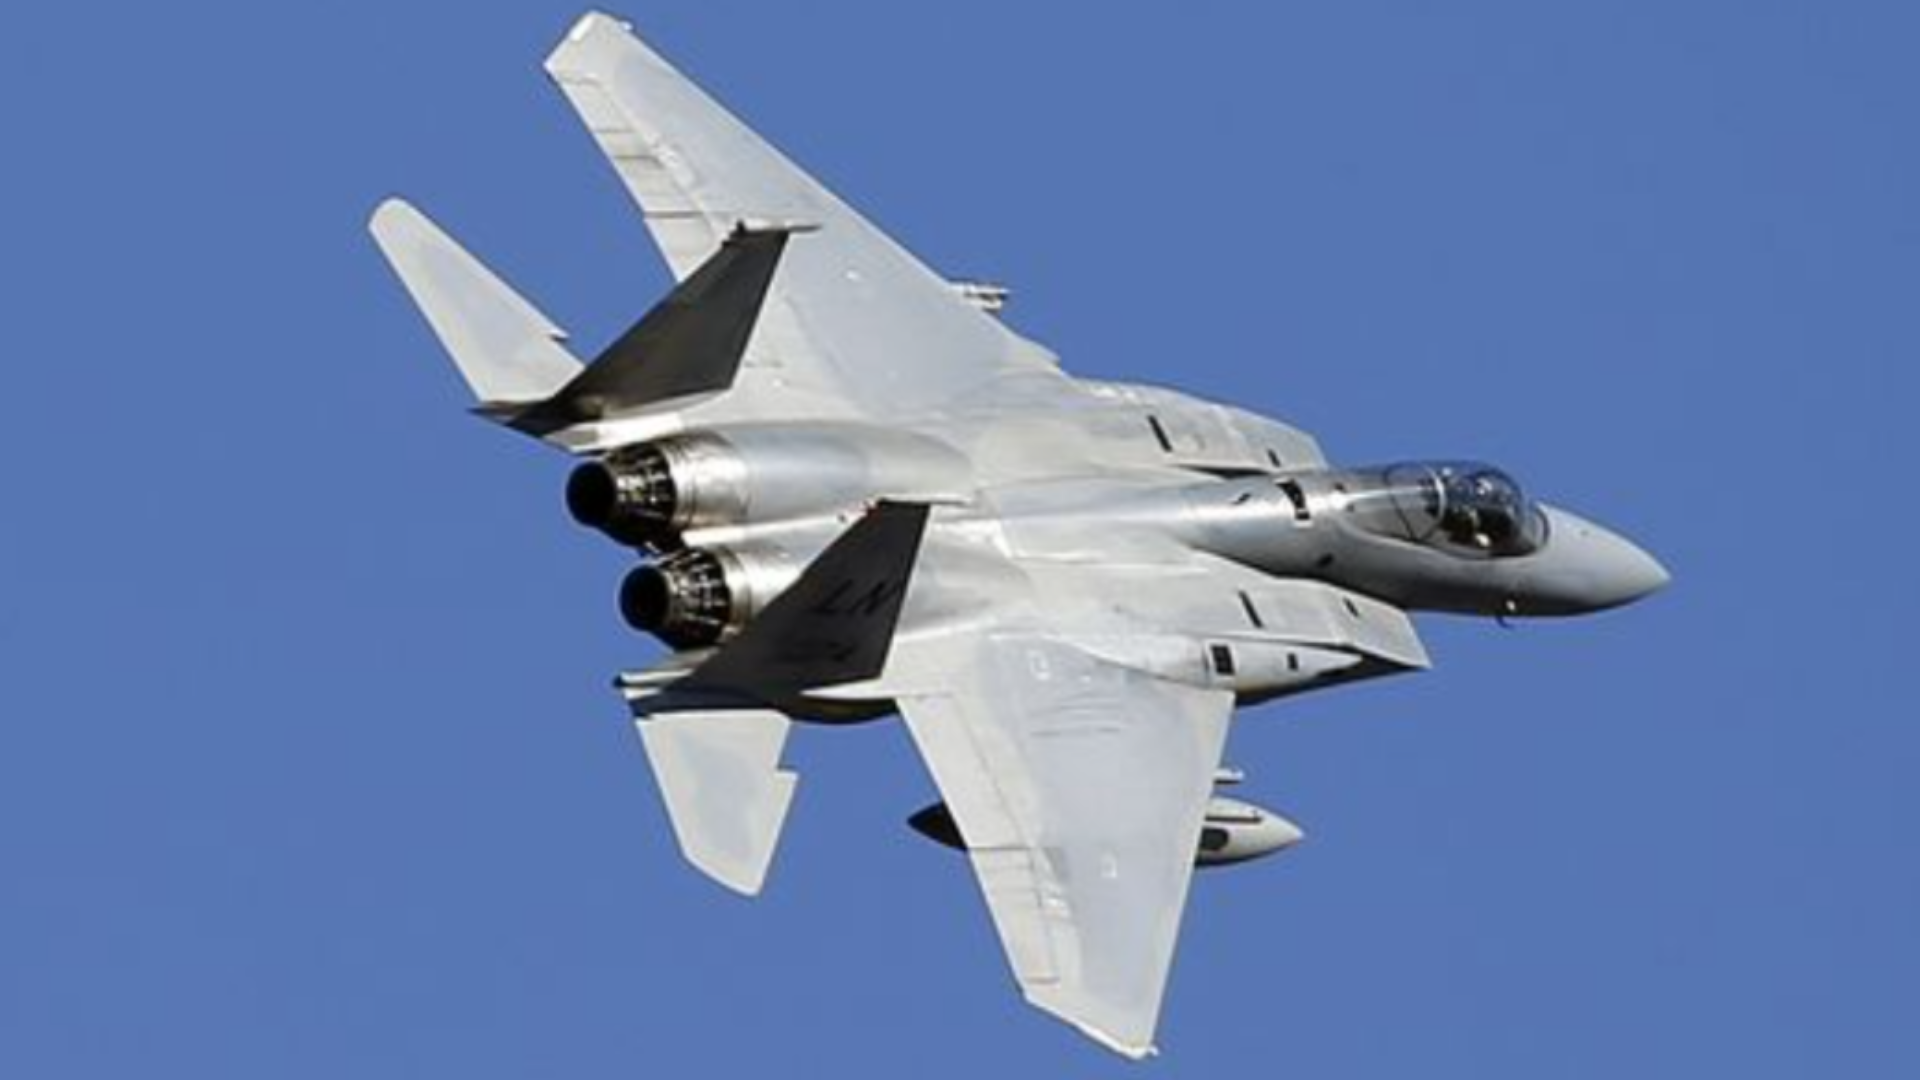 That loud boom was the sound of fighter jets heading to intercept a small plane entering a restricted fly area over DC.